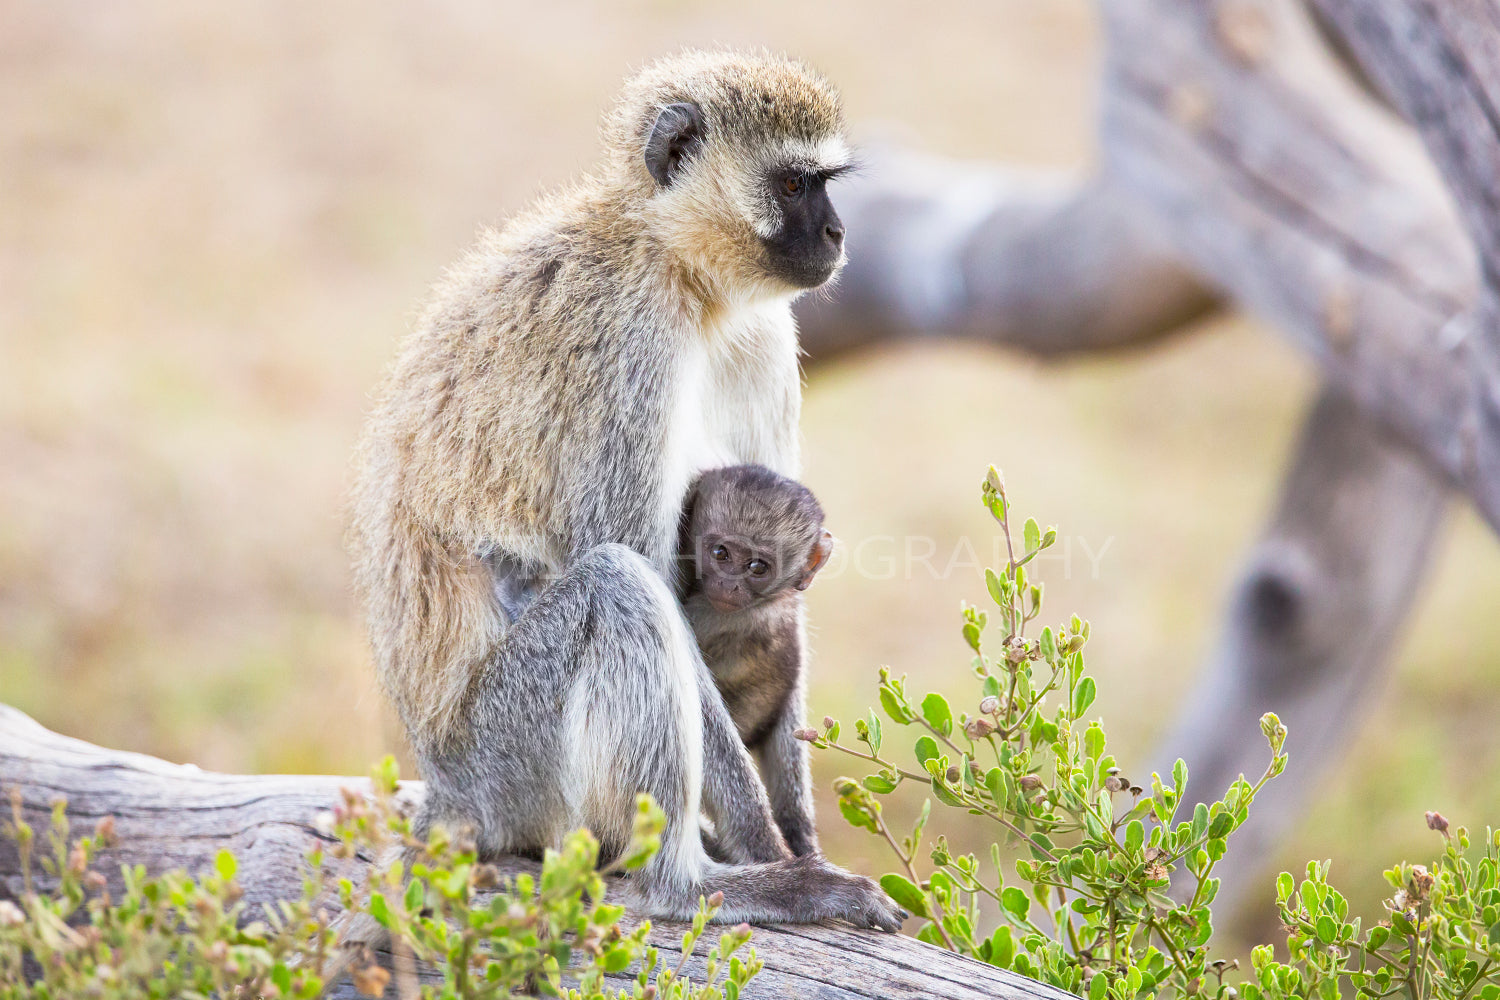 African monkey and her baby sits together